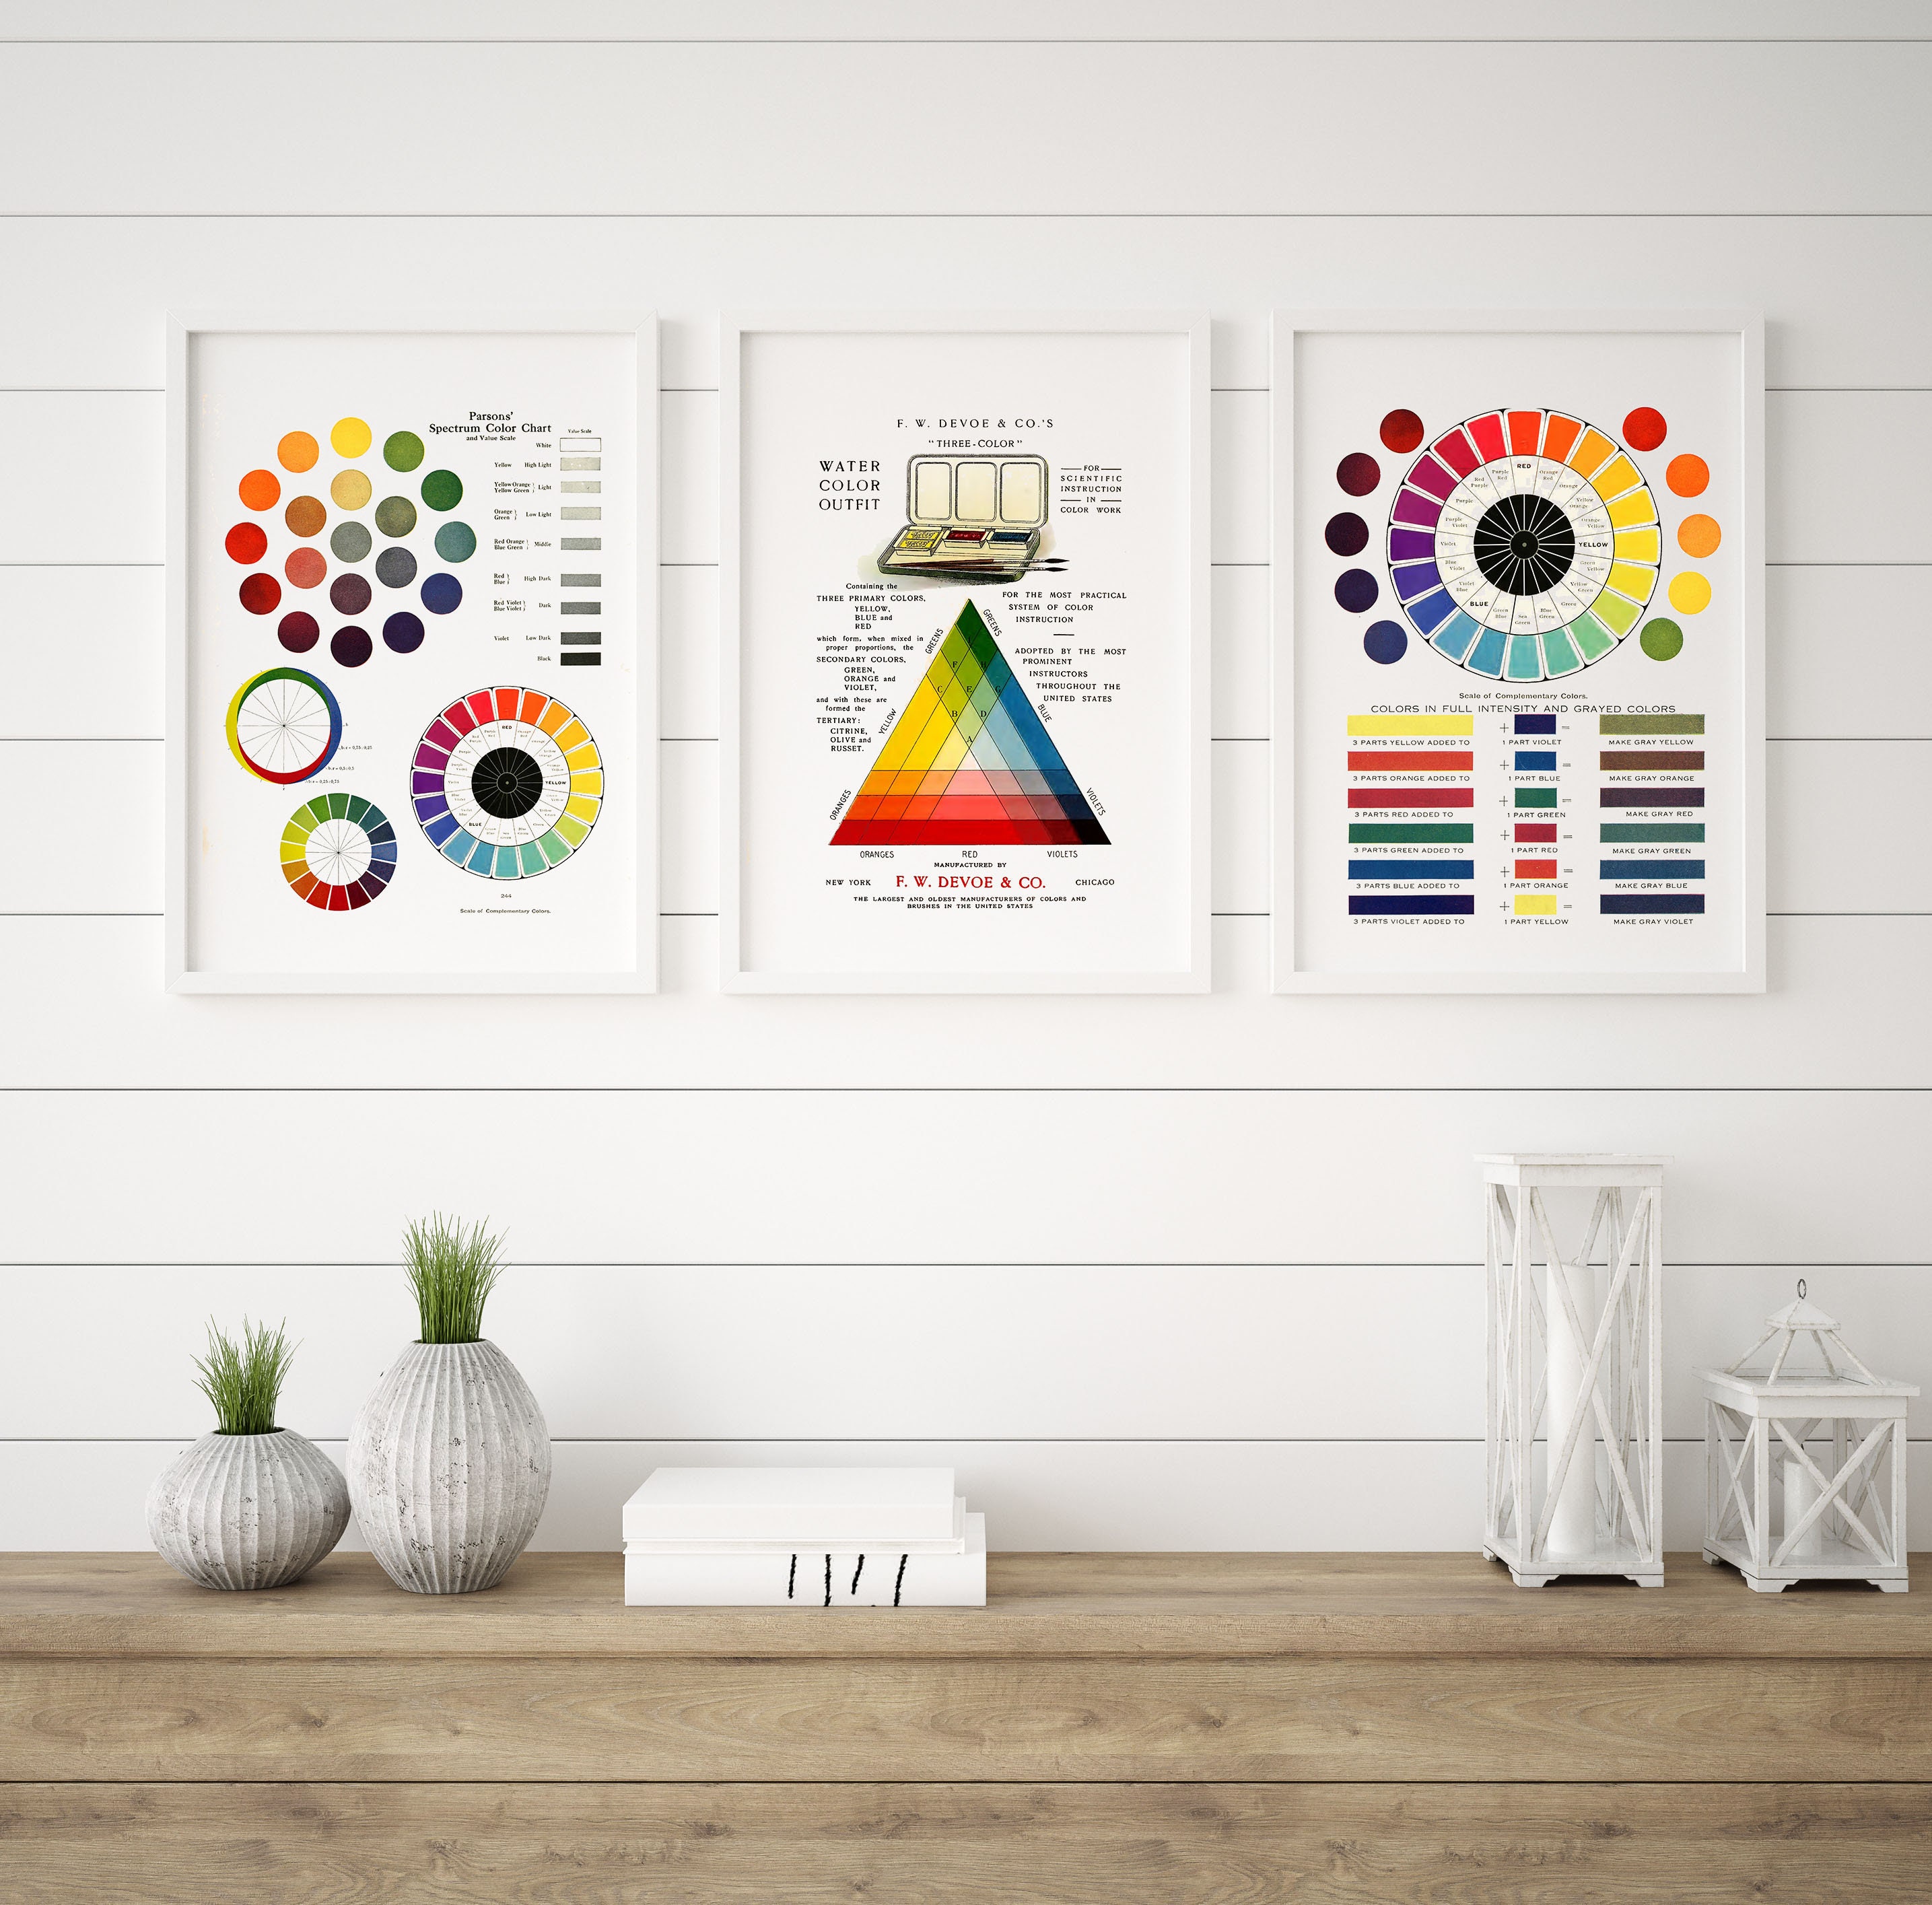  Color Theory Education Poster Color Wheel Theory Poster Color  Map Poster Color Card Poster (2) Canvas Painting Posters And Prints Wall  Art Pictures for Living Room Bedroom Decor 08x12inch(20x30cm) Un: Posters